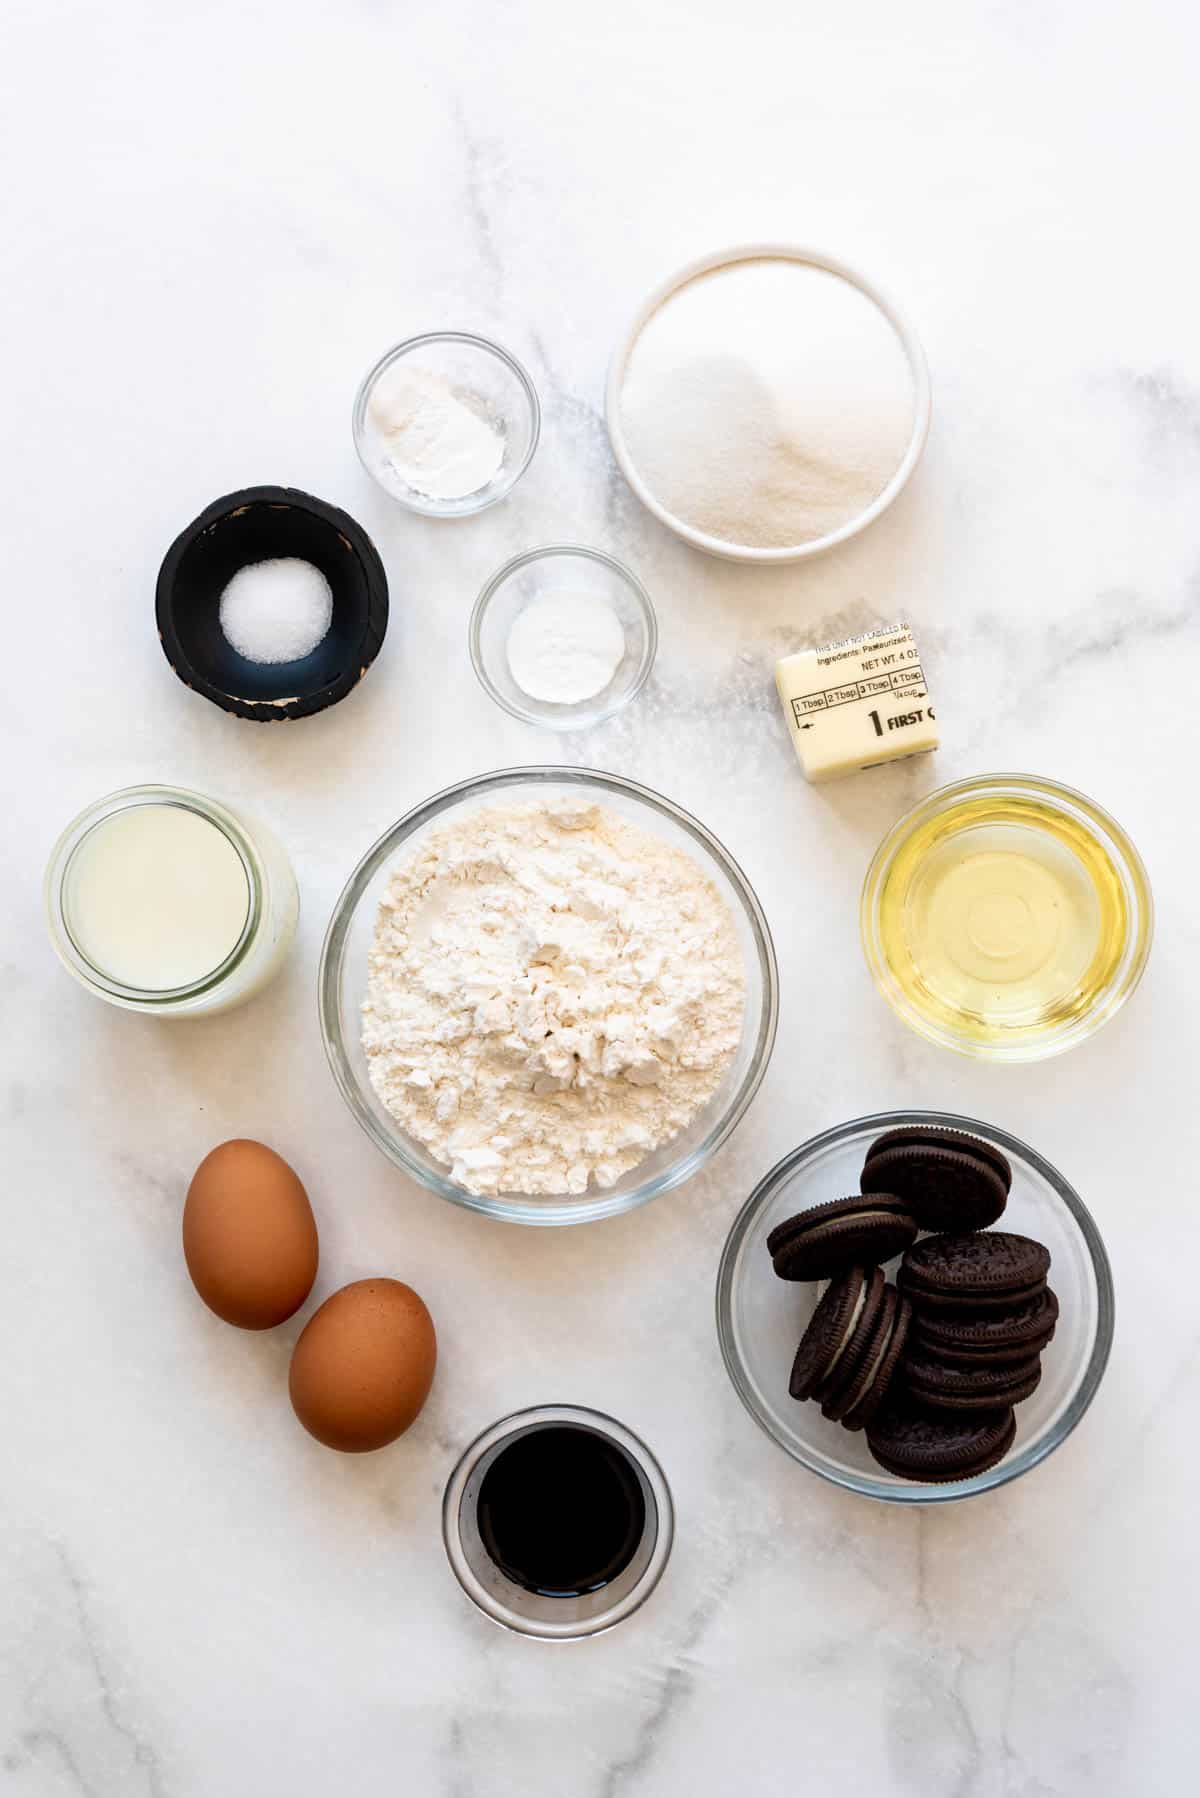 Top view of ingredients needed to make Oreo Cupcakes with Cookies & Cream Frosting. 